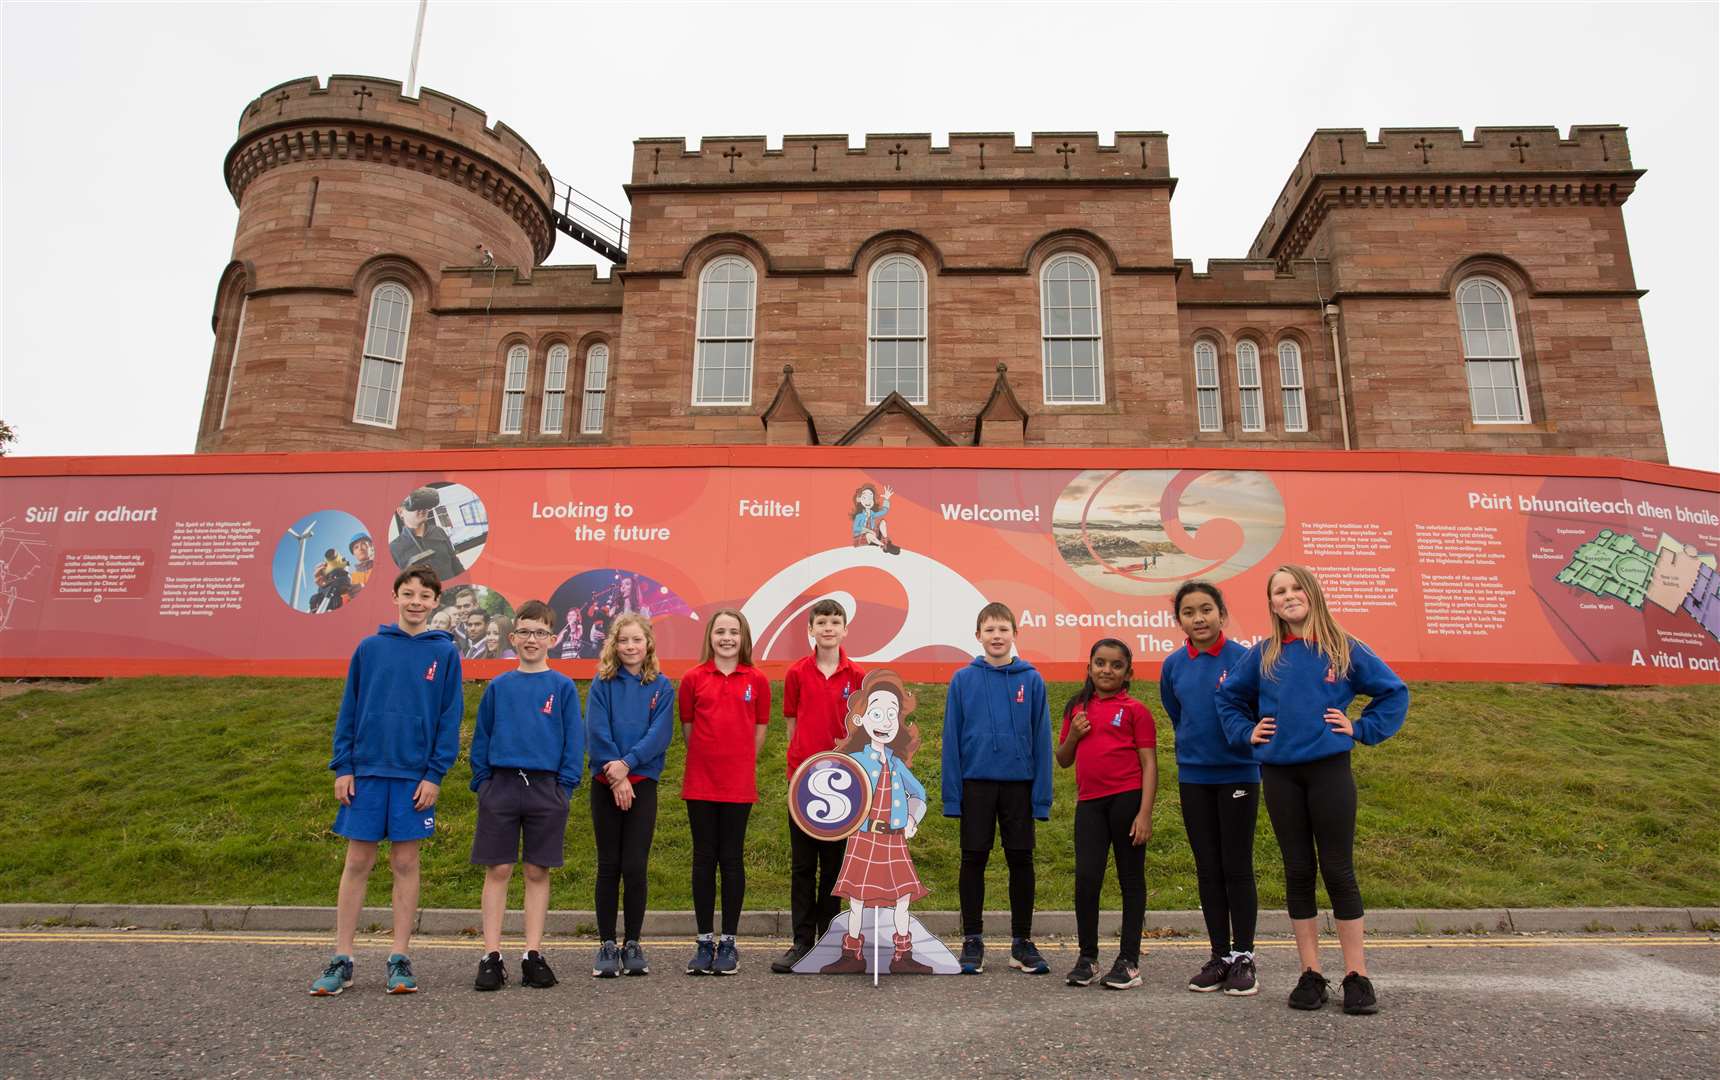 Primary 6 pupils from Crown Primary School meet ‘Young Flora’ during their visit to Inverness Castle and learning about the Highlands of the past, as well as giving a look into the future for Castle Hill, from the information now surrounding the castle. Picture: Alison White.